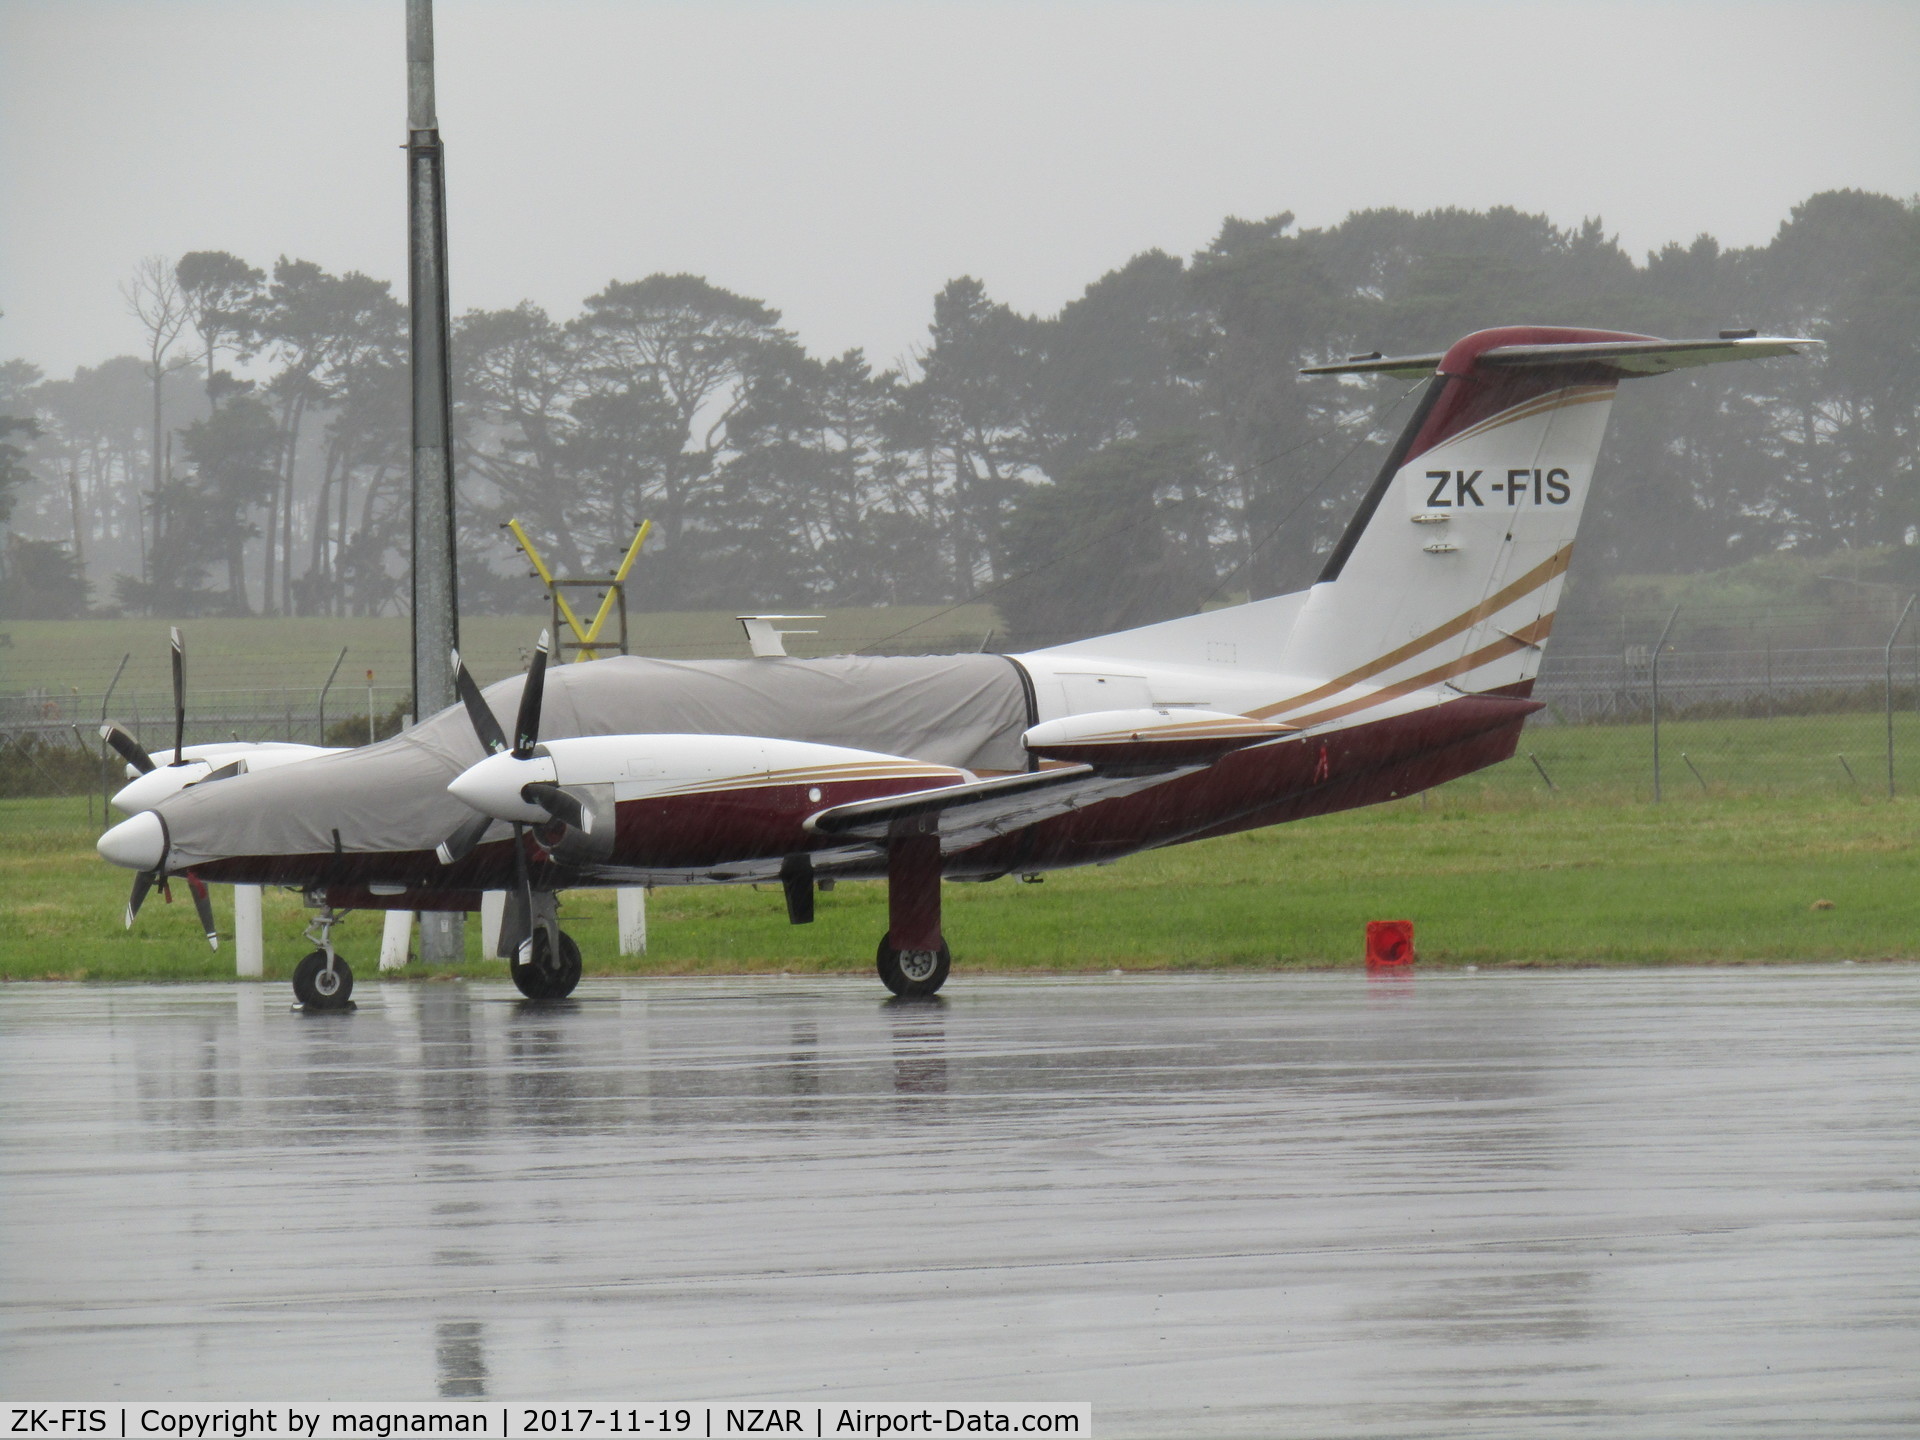 ZK-FIS, 1984 Piper PA-42-1000 Cheyenne IV C/N 42-5527019, ex VH-BUR now registered locally